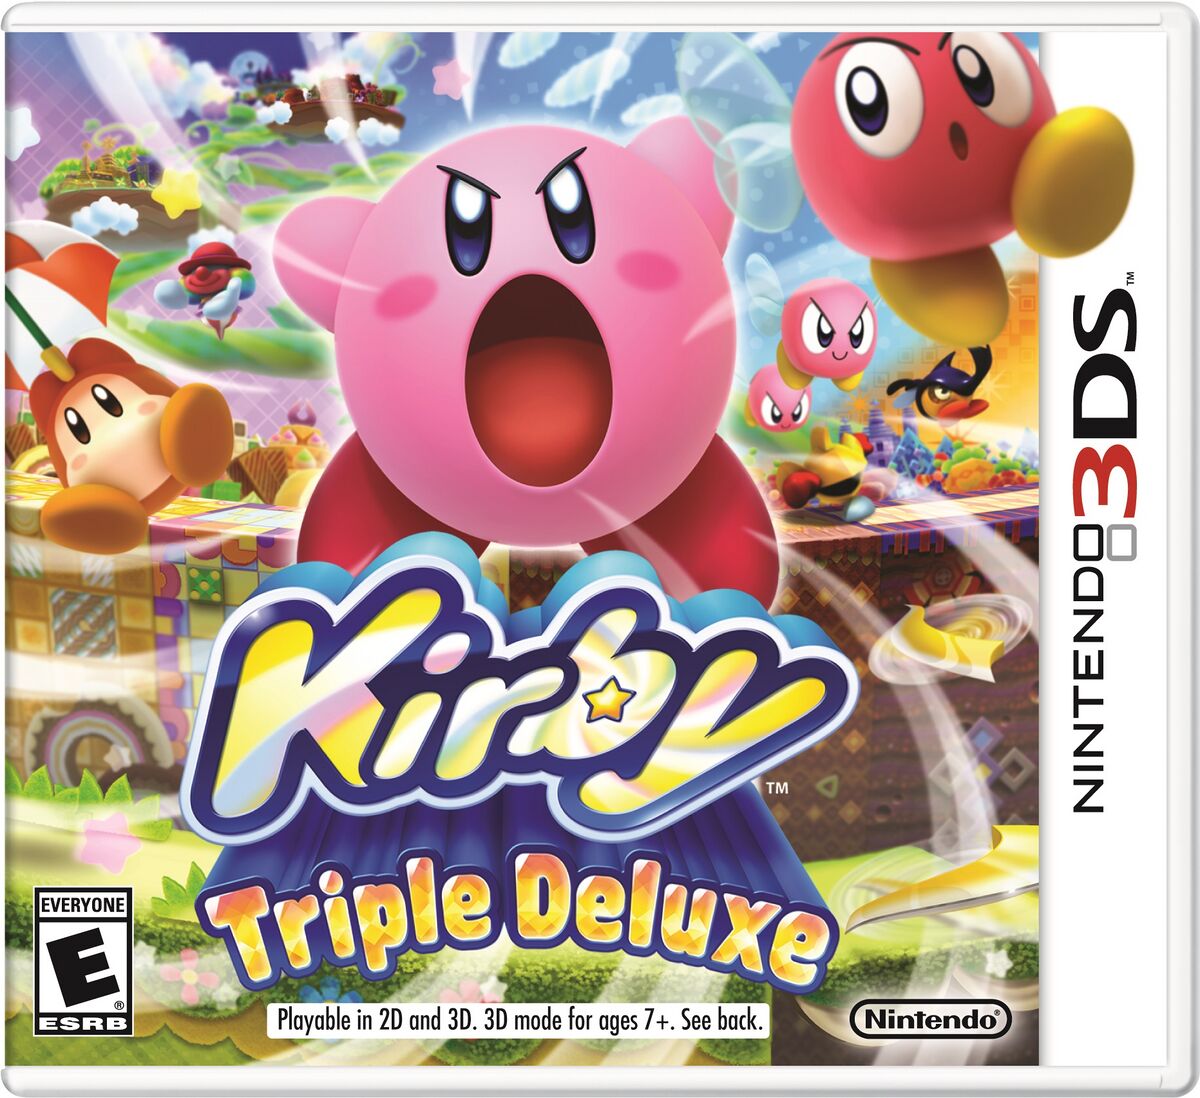 kirby-triple-deluxe-strategywiki-the-video-game-walkthrough-and-strategy-guide-wiki